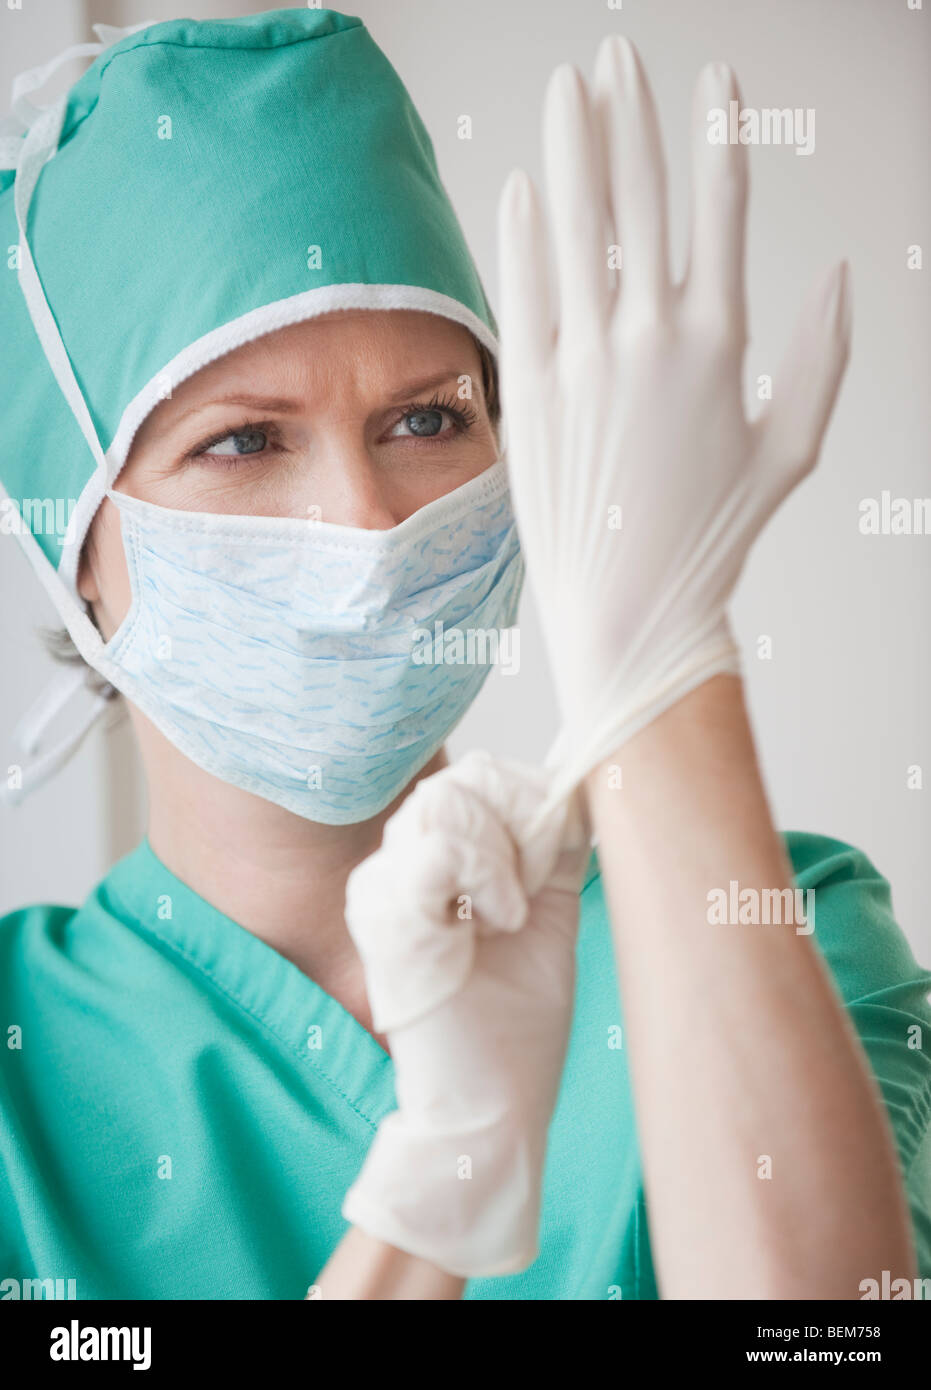 Female doctor putting on gloves Stock Photo